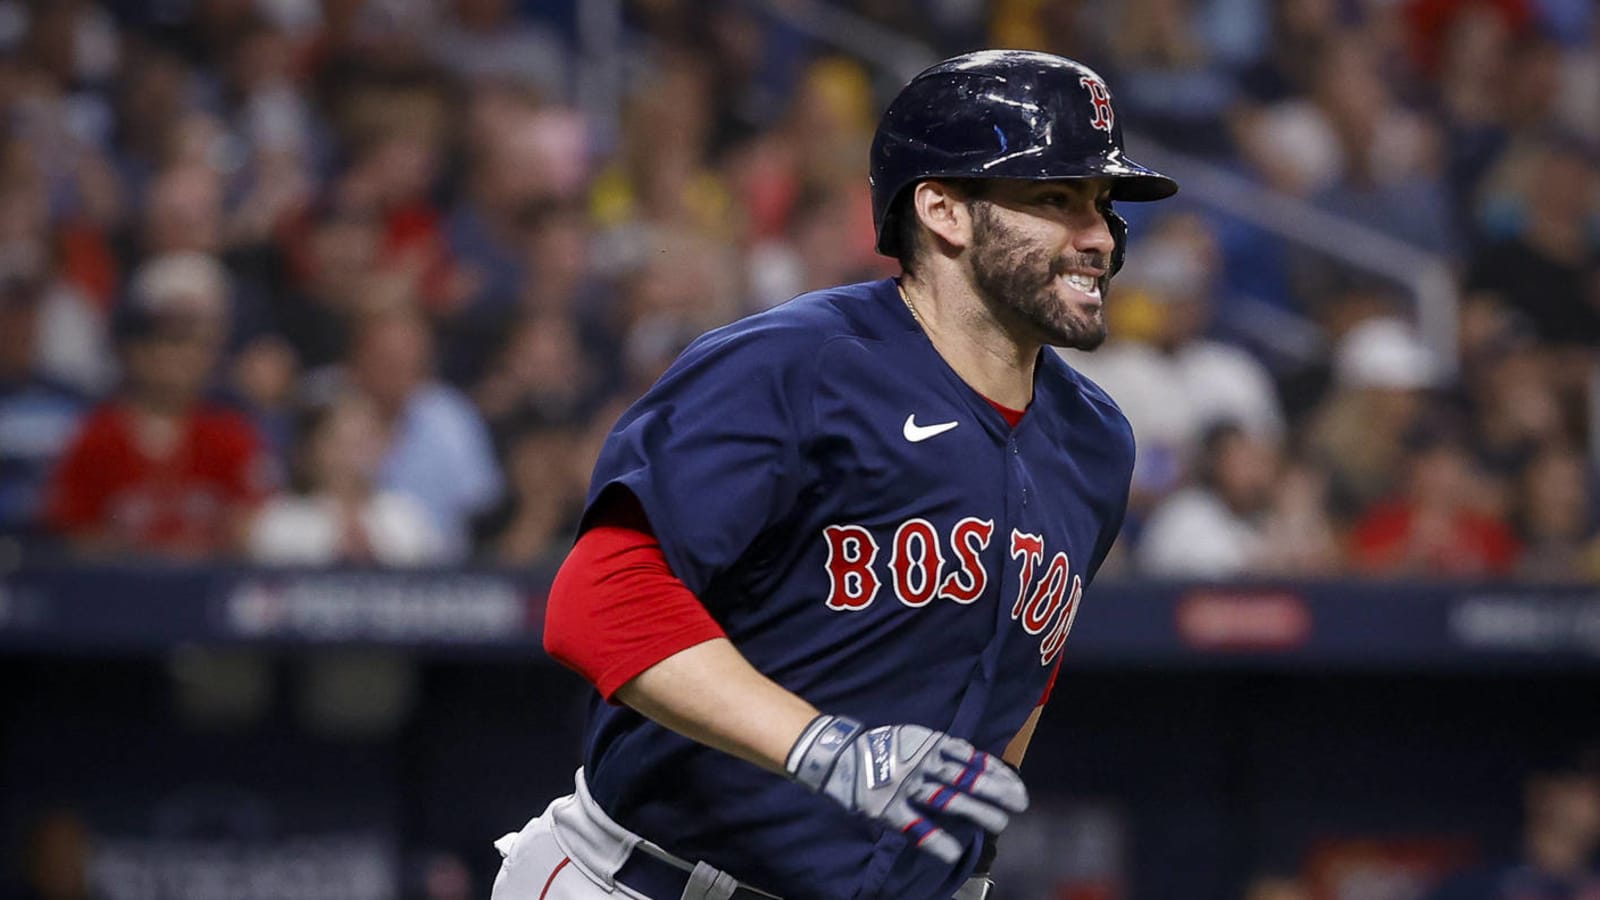 Despite ankle injury, J.D. Martinez has monster game as Red Sox rock Rays